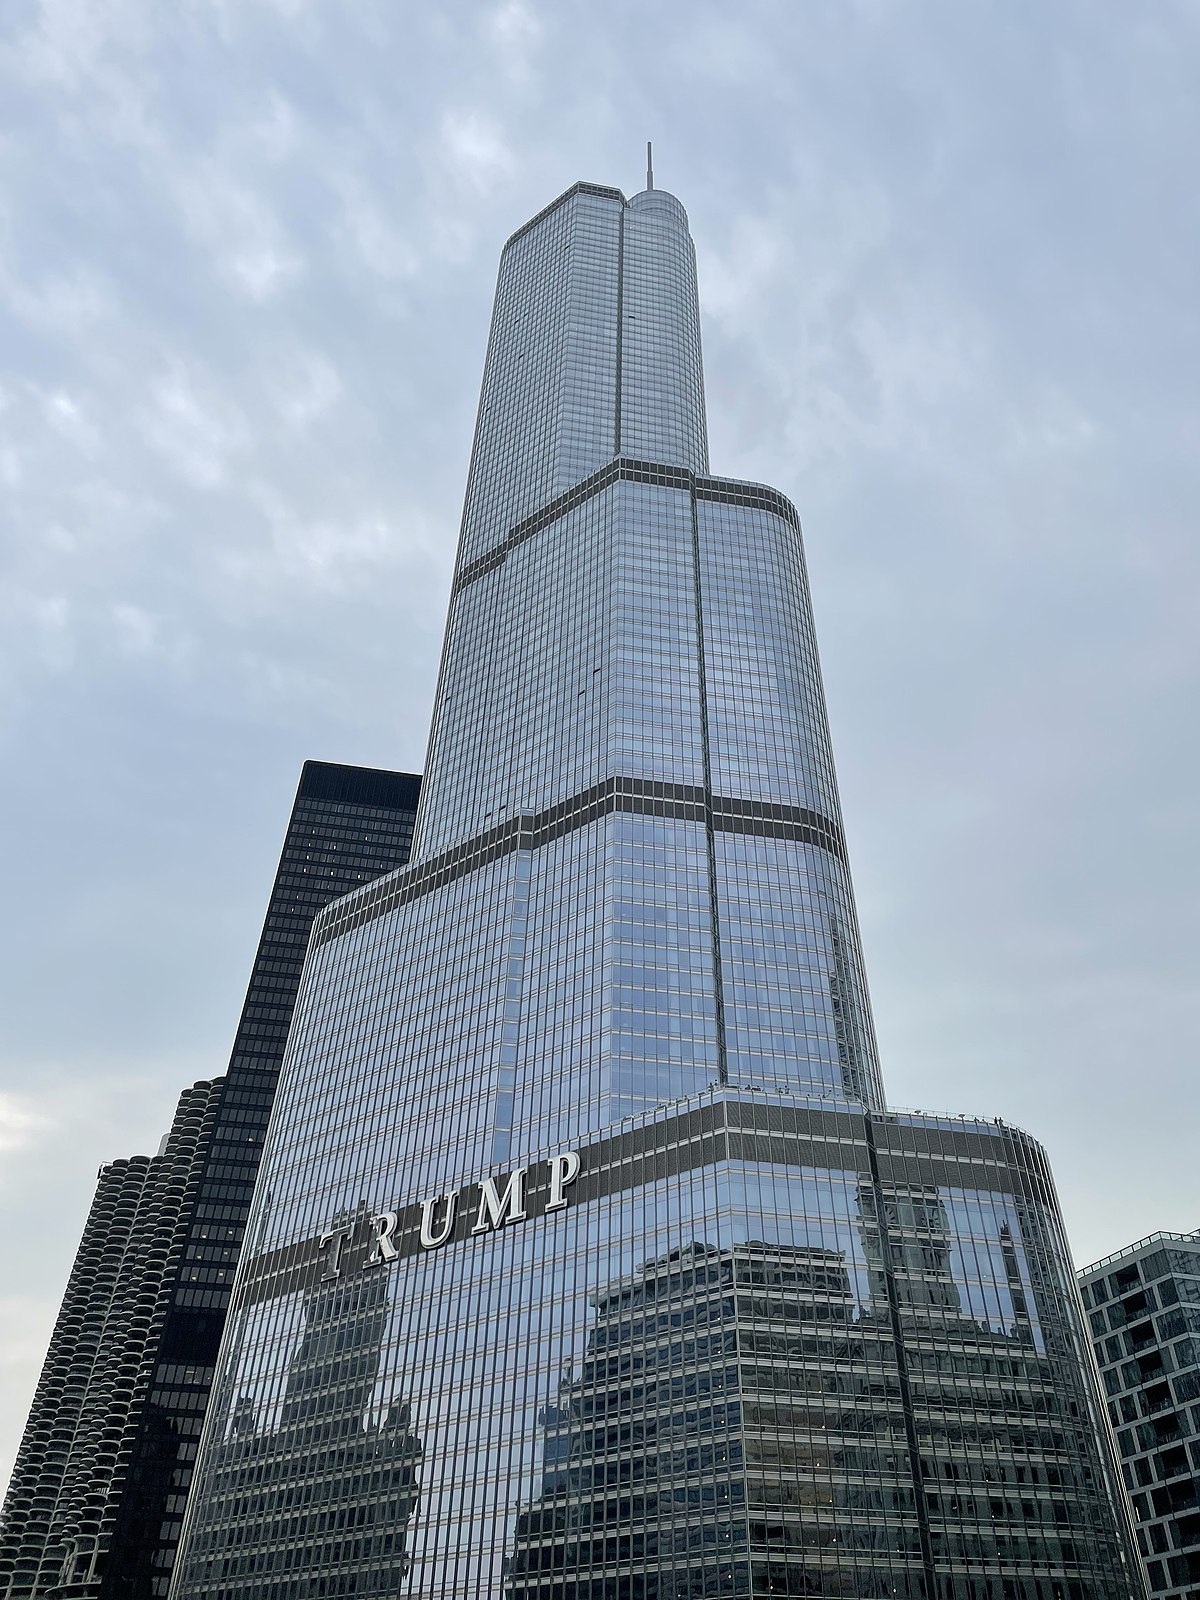 Trump International Hotel and Tower (Chicago) - Wikipedia